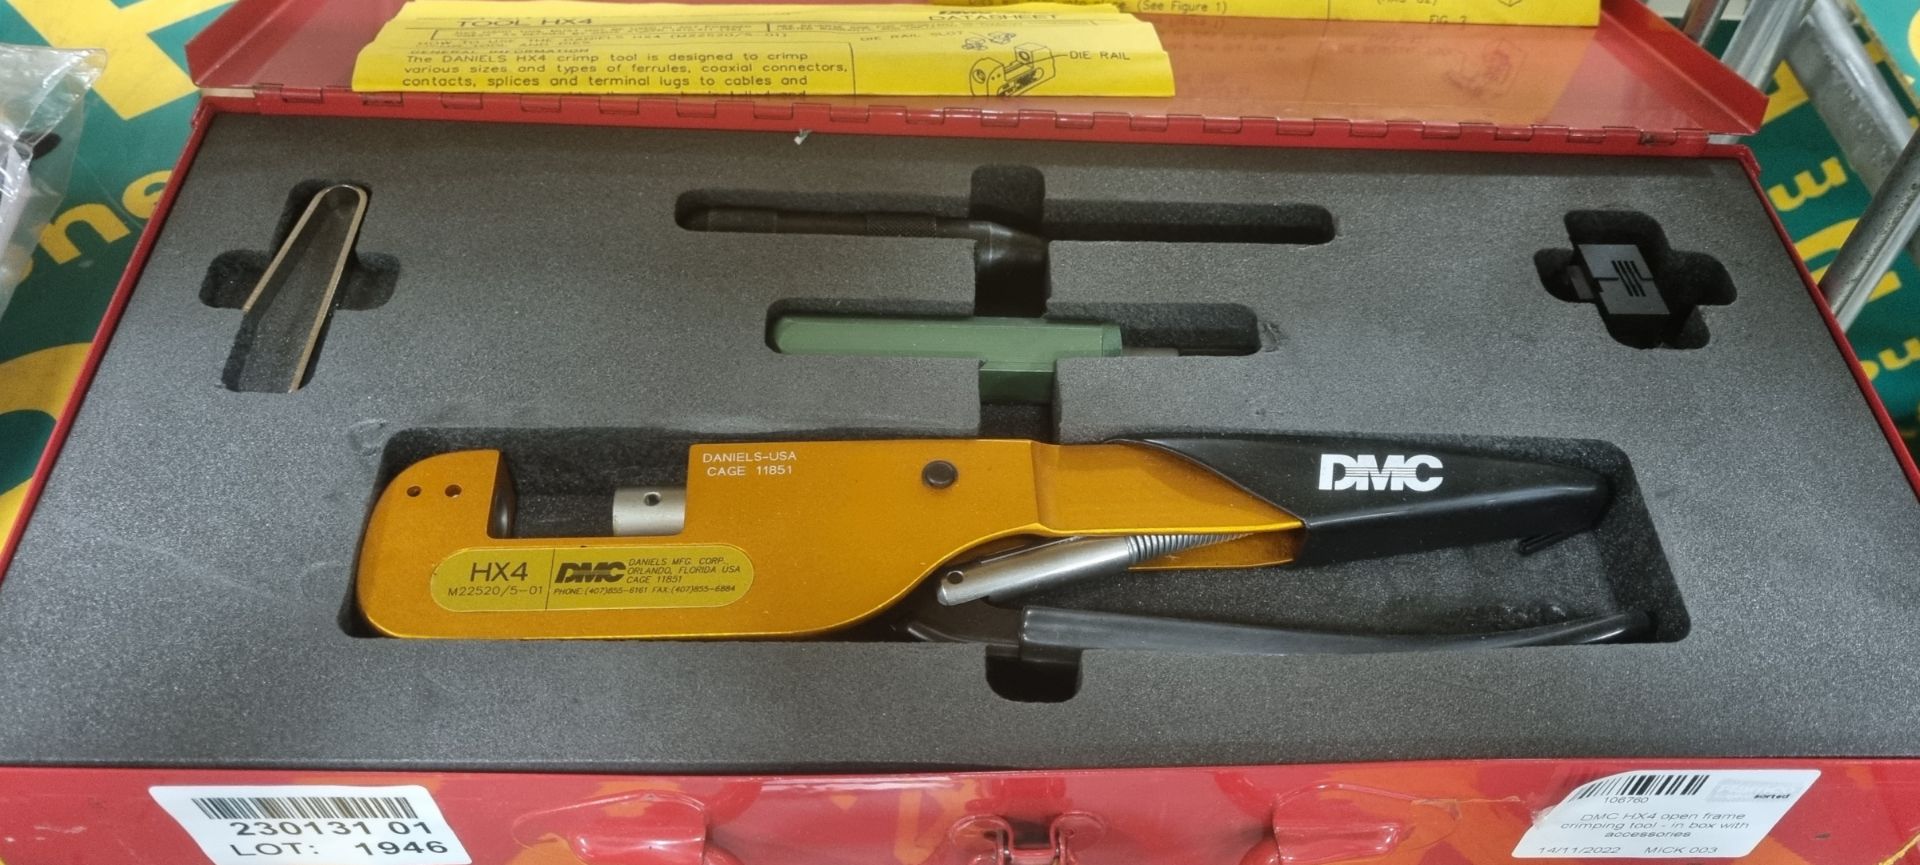 DMC HX4 open frame crimping tool - in box with accessories - Image 2 of 3